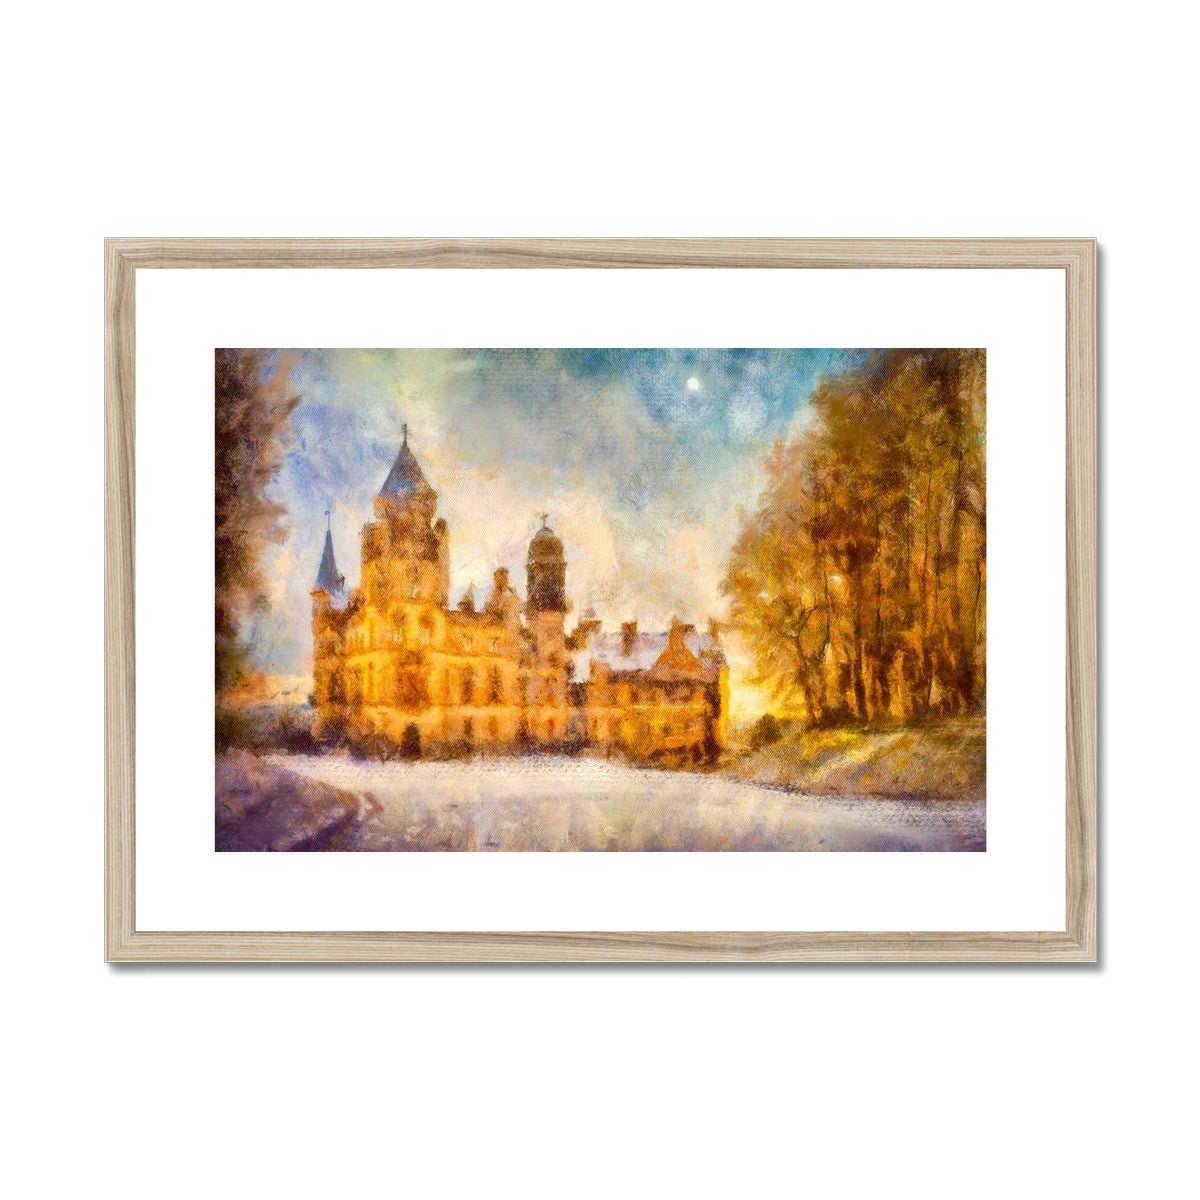 Dunrobin Castle Moonlight Painting | Framed & Mounted Prints From Scotland-Framed & Mounted Prints-Historic & Iconic Scotland Art Gallery-A2 Landscape-Natural Frame-Paintings, Prints, Homeware, Art Gifts From Scotland By Scottish Artist Kevin Hunter